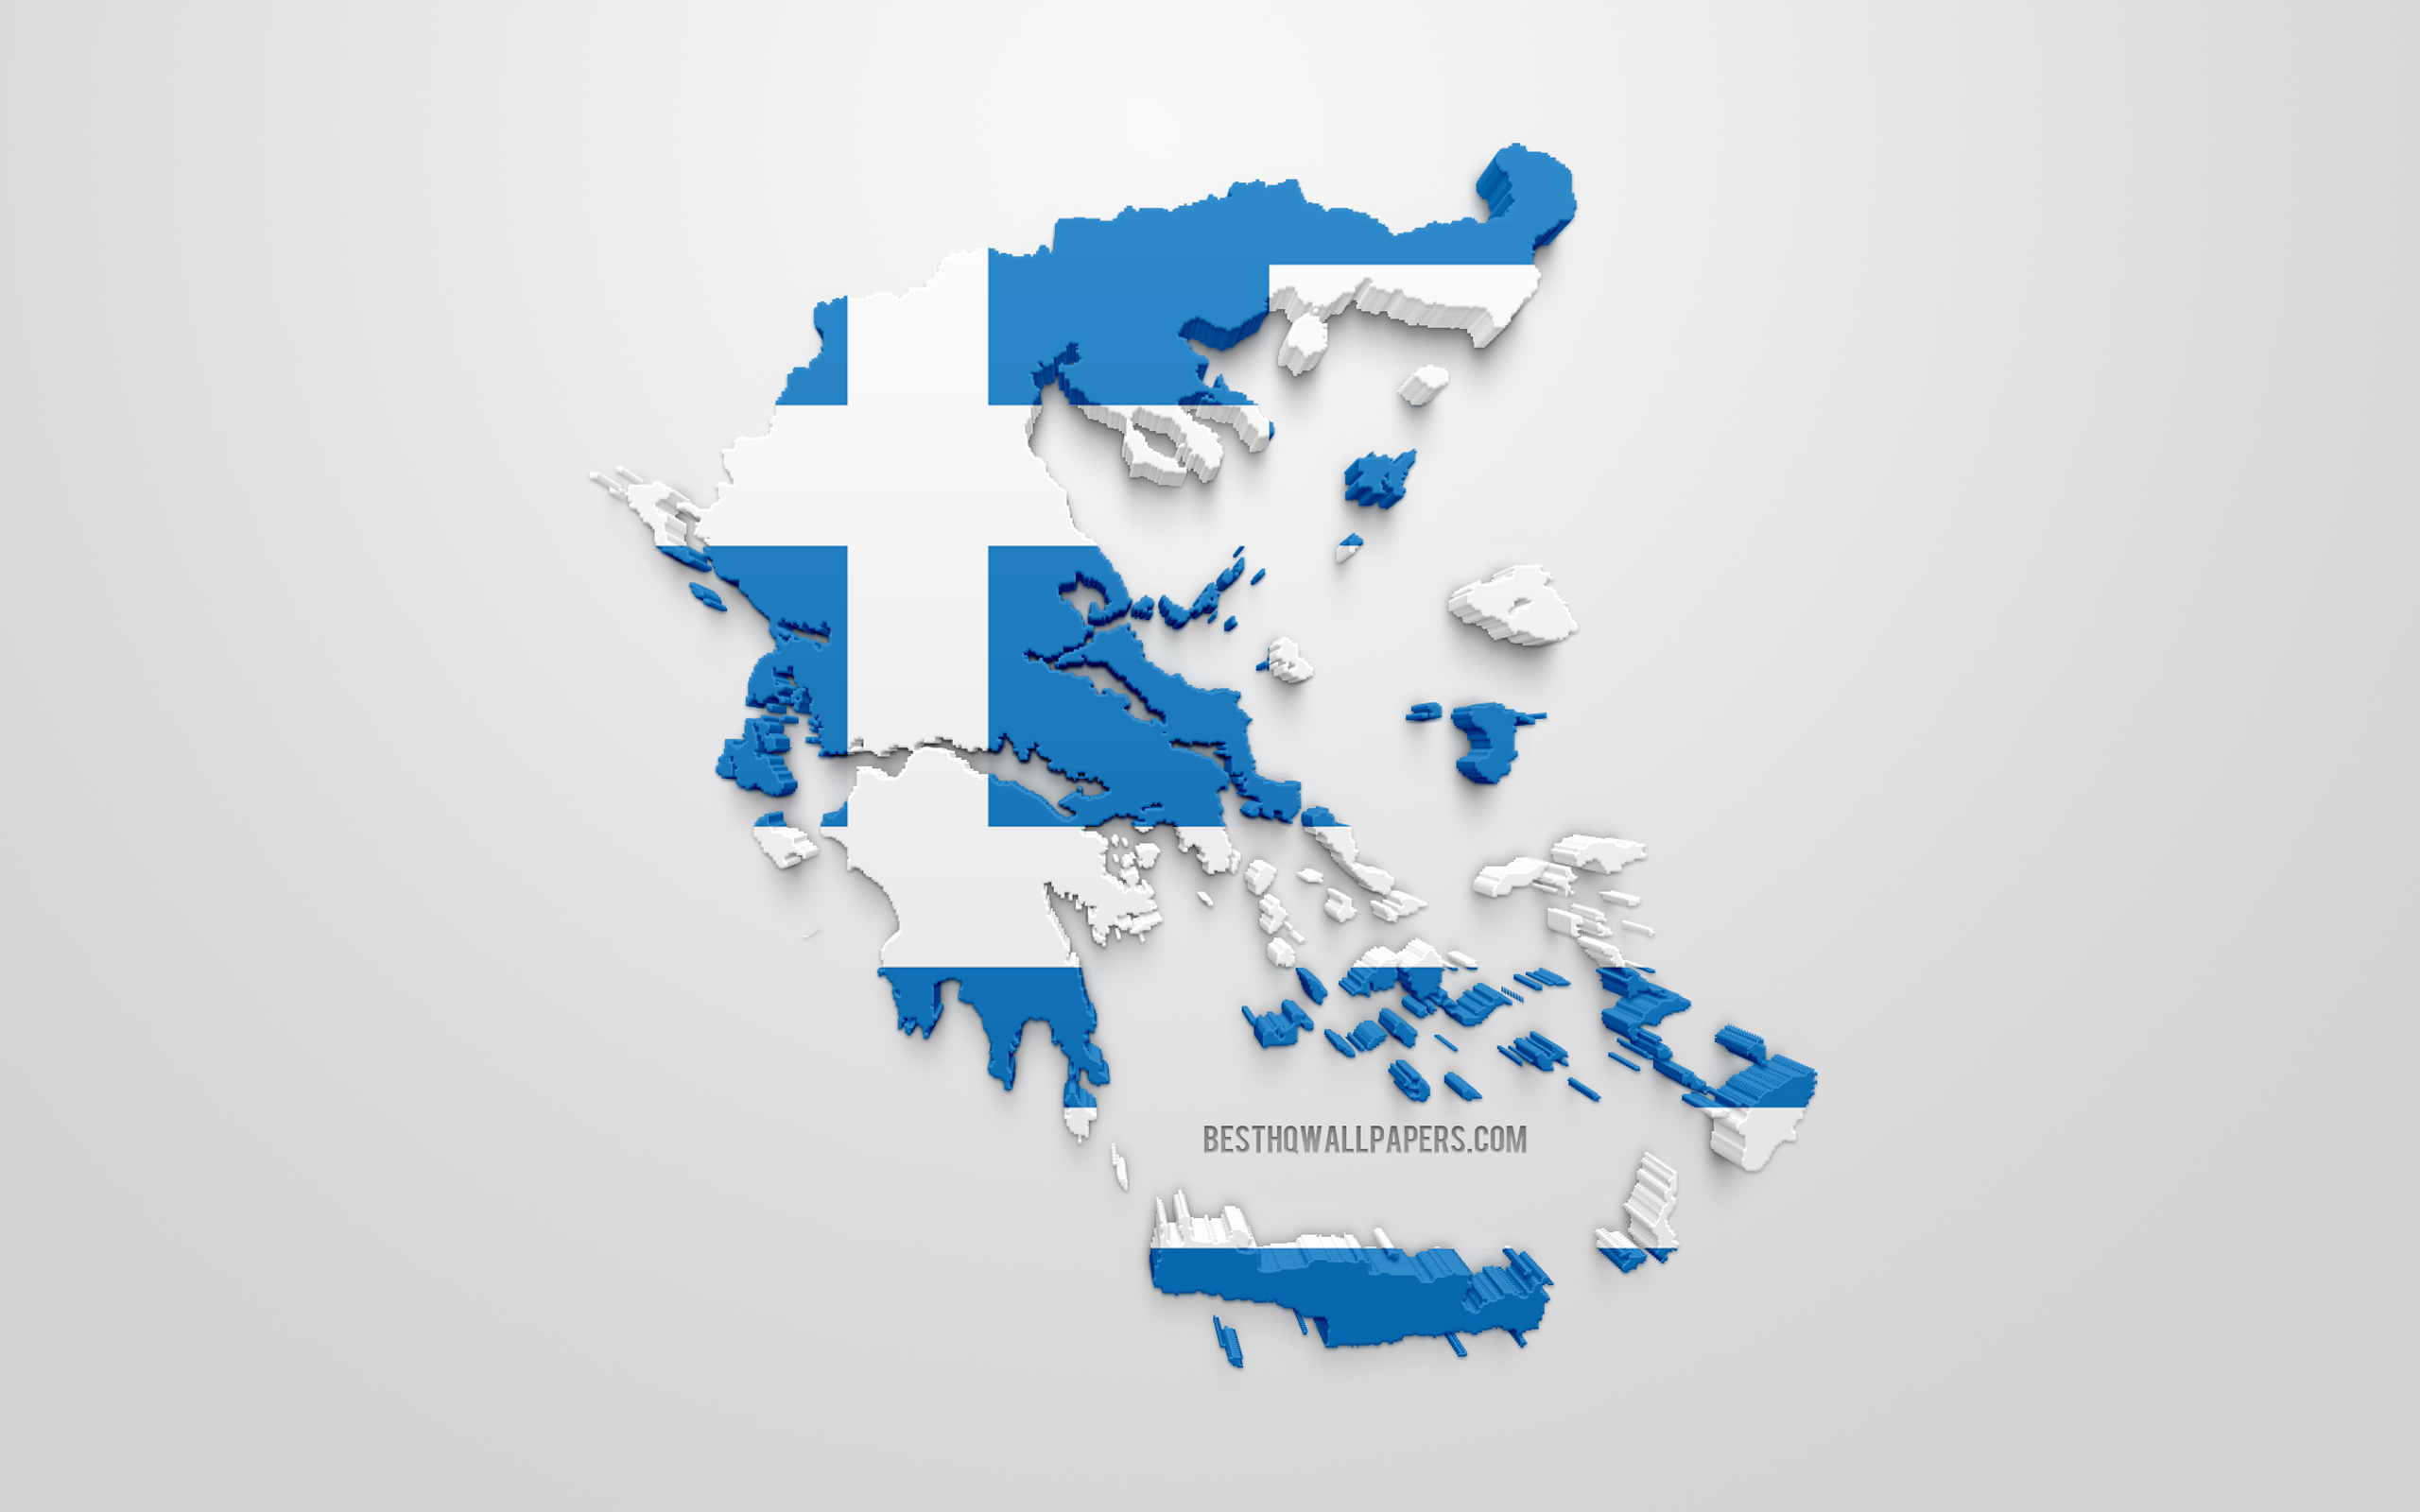 Download wallpaper 3D flag of Greece, silhouette map of Greece, 3D art, Greece flag, Europe, Greece, geography, Greece 3D silhouette for desktop with resolution 2560x1600. High Quality HD picture wallpaper